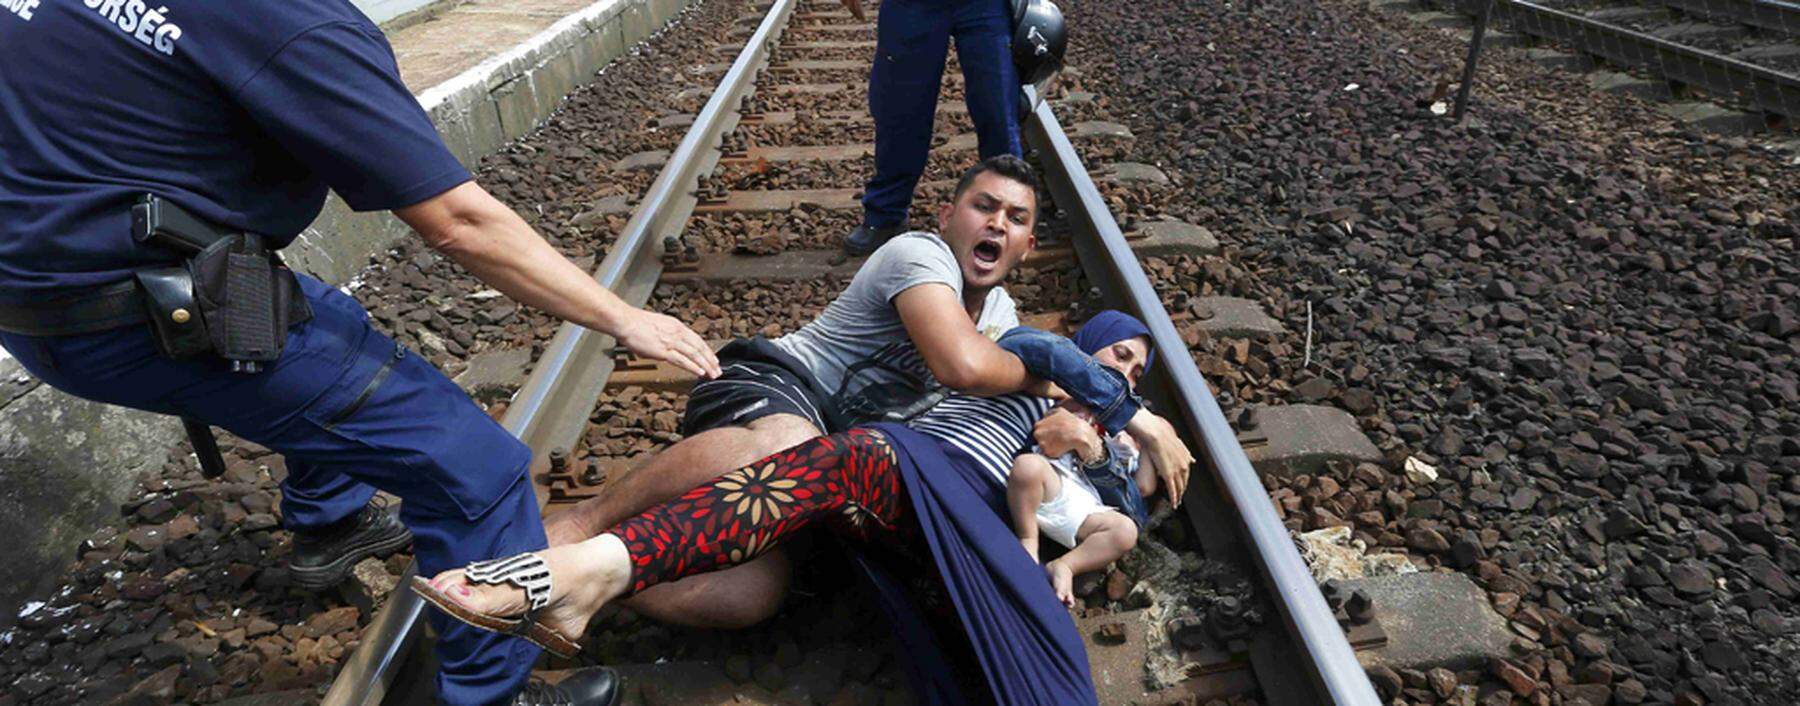 Hungarian policemen stand by the family of migrants as they wanted to run away at the railway station in the town of Bicske